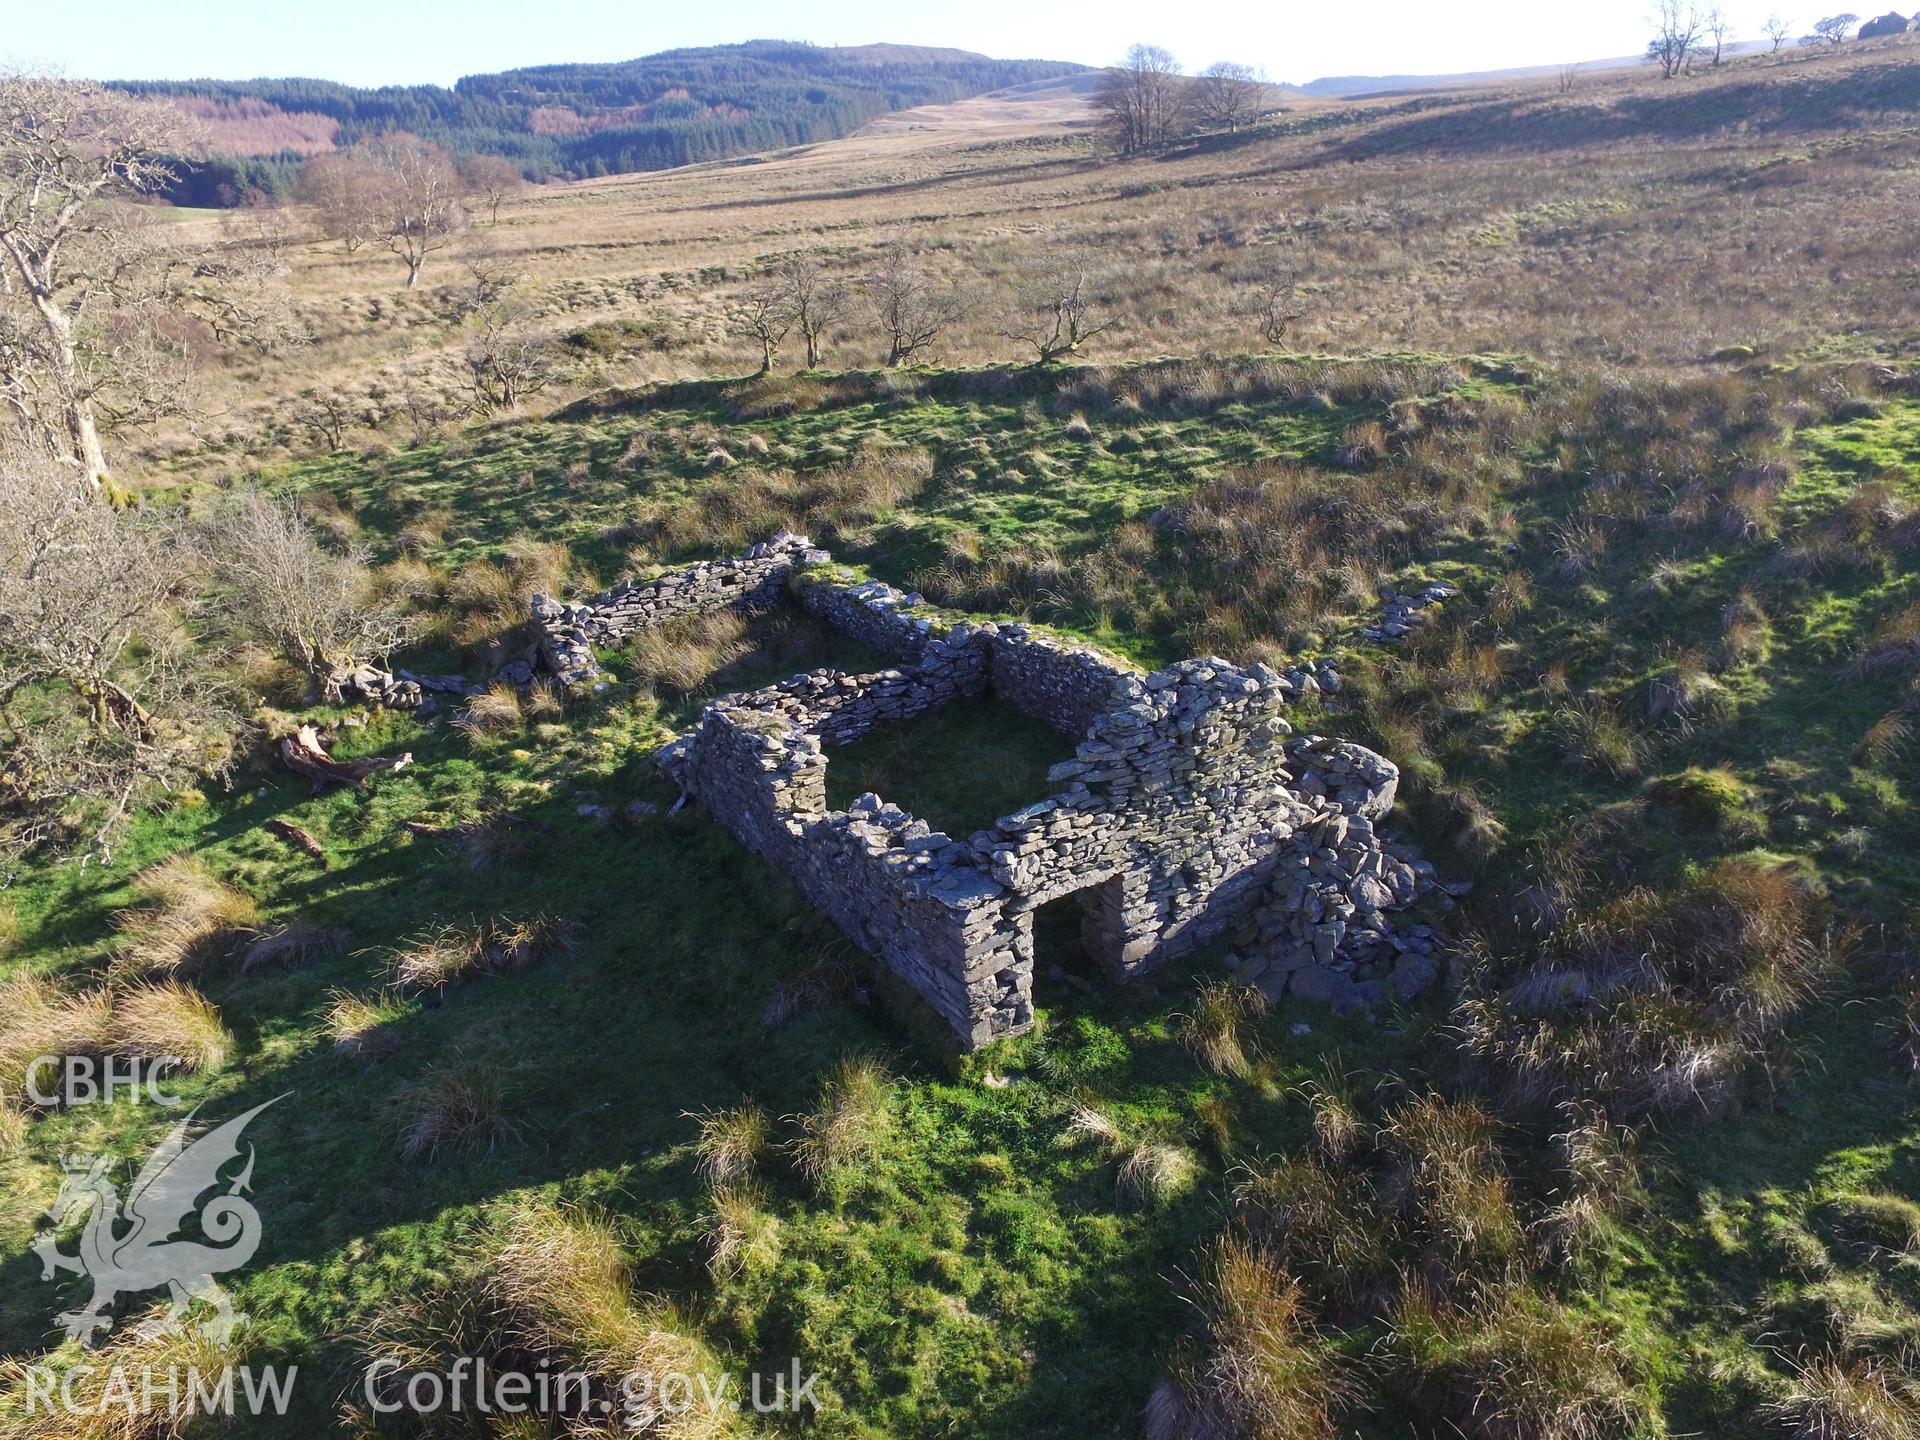 Aerial view of the remains of a doorway and stone walls belonging to a cottage west of the ruined Caradog house, which is south west of Bryneithinog farm, Ystrad Fflur. Colour photograph taken by Paul R. Davis on 18th November 2018.